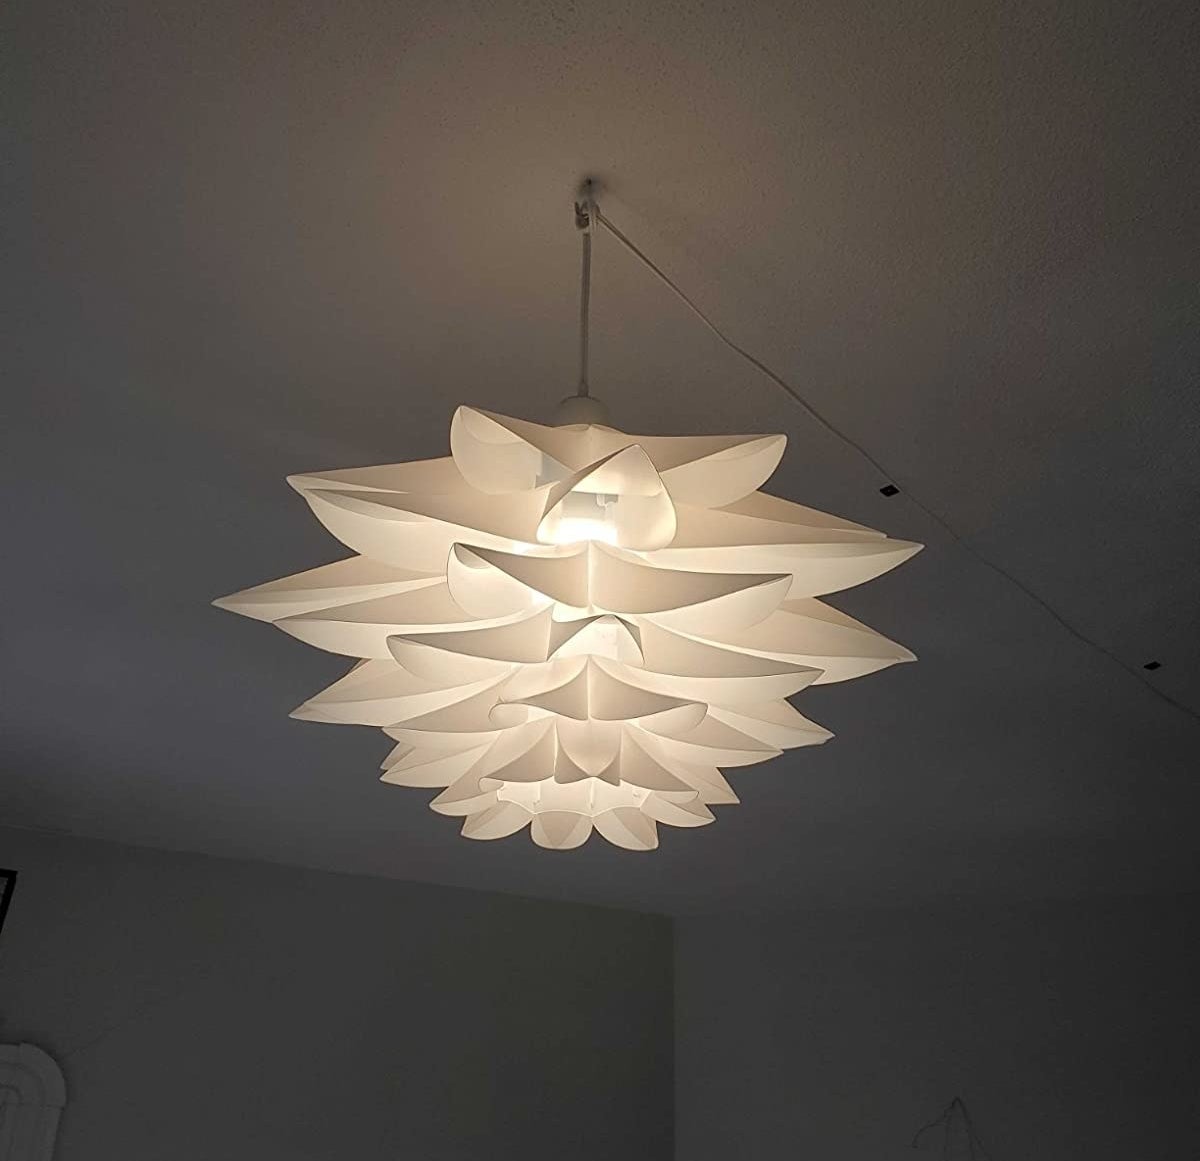 reviewer image of the lotus pendant light hanging from the ceiling